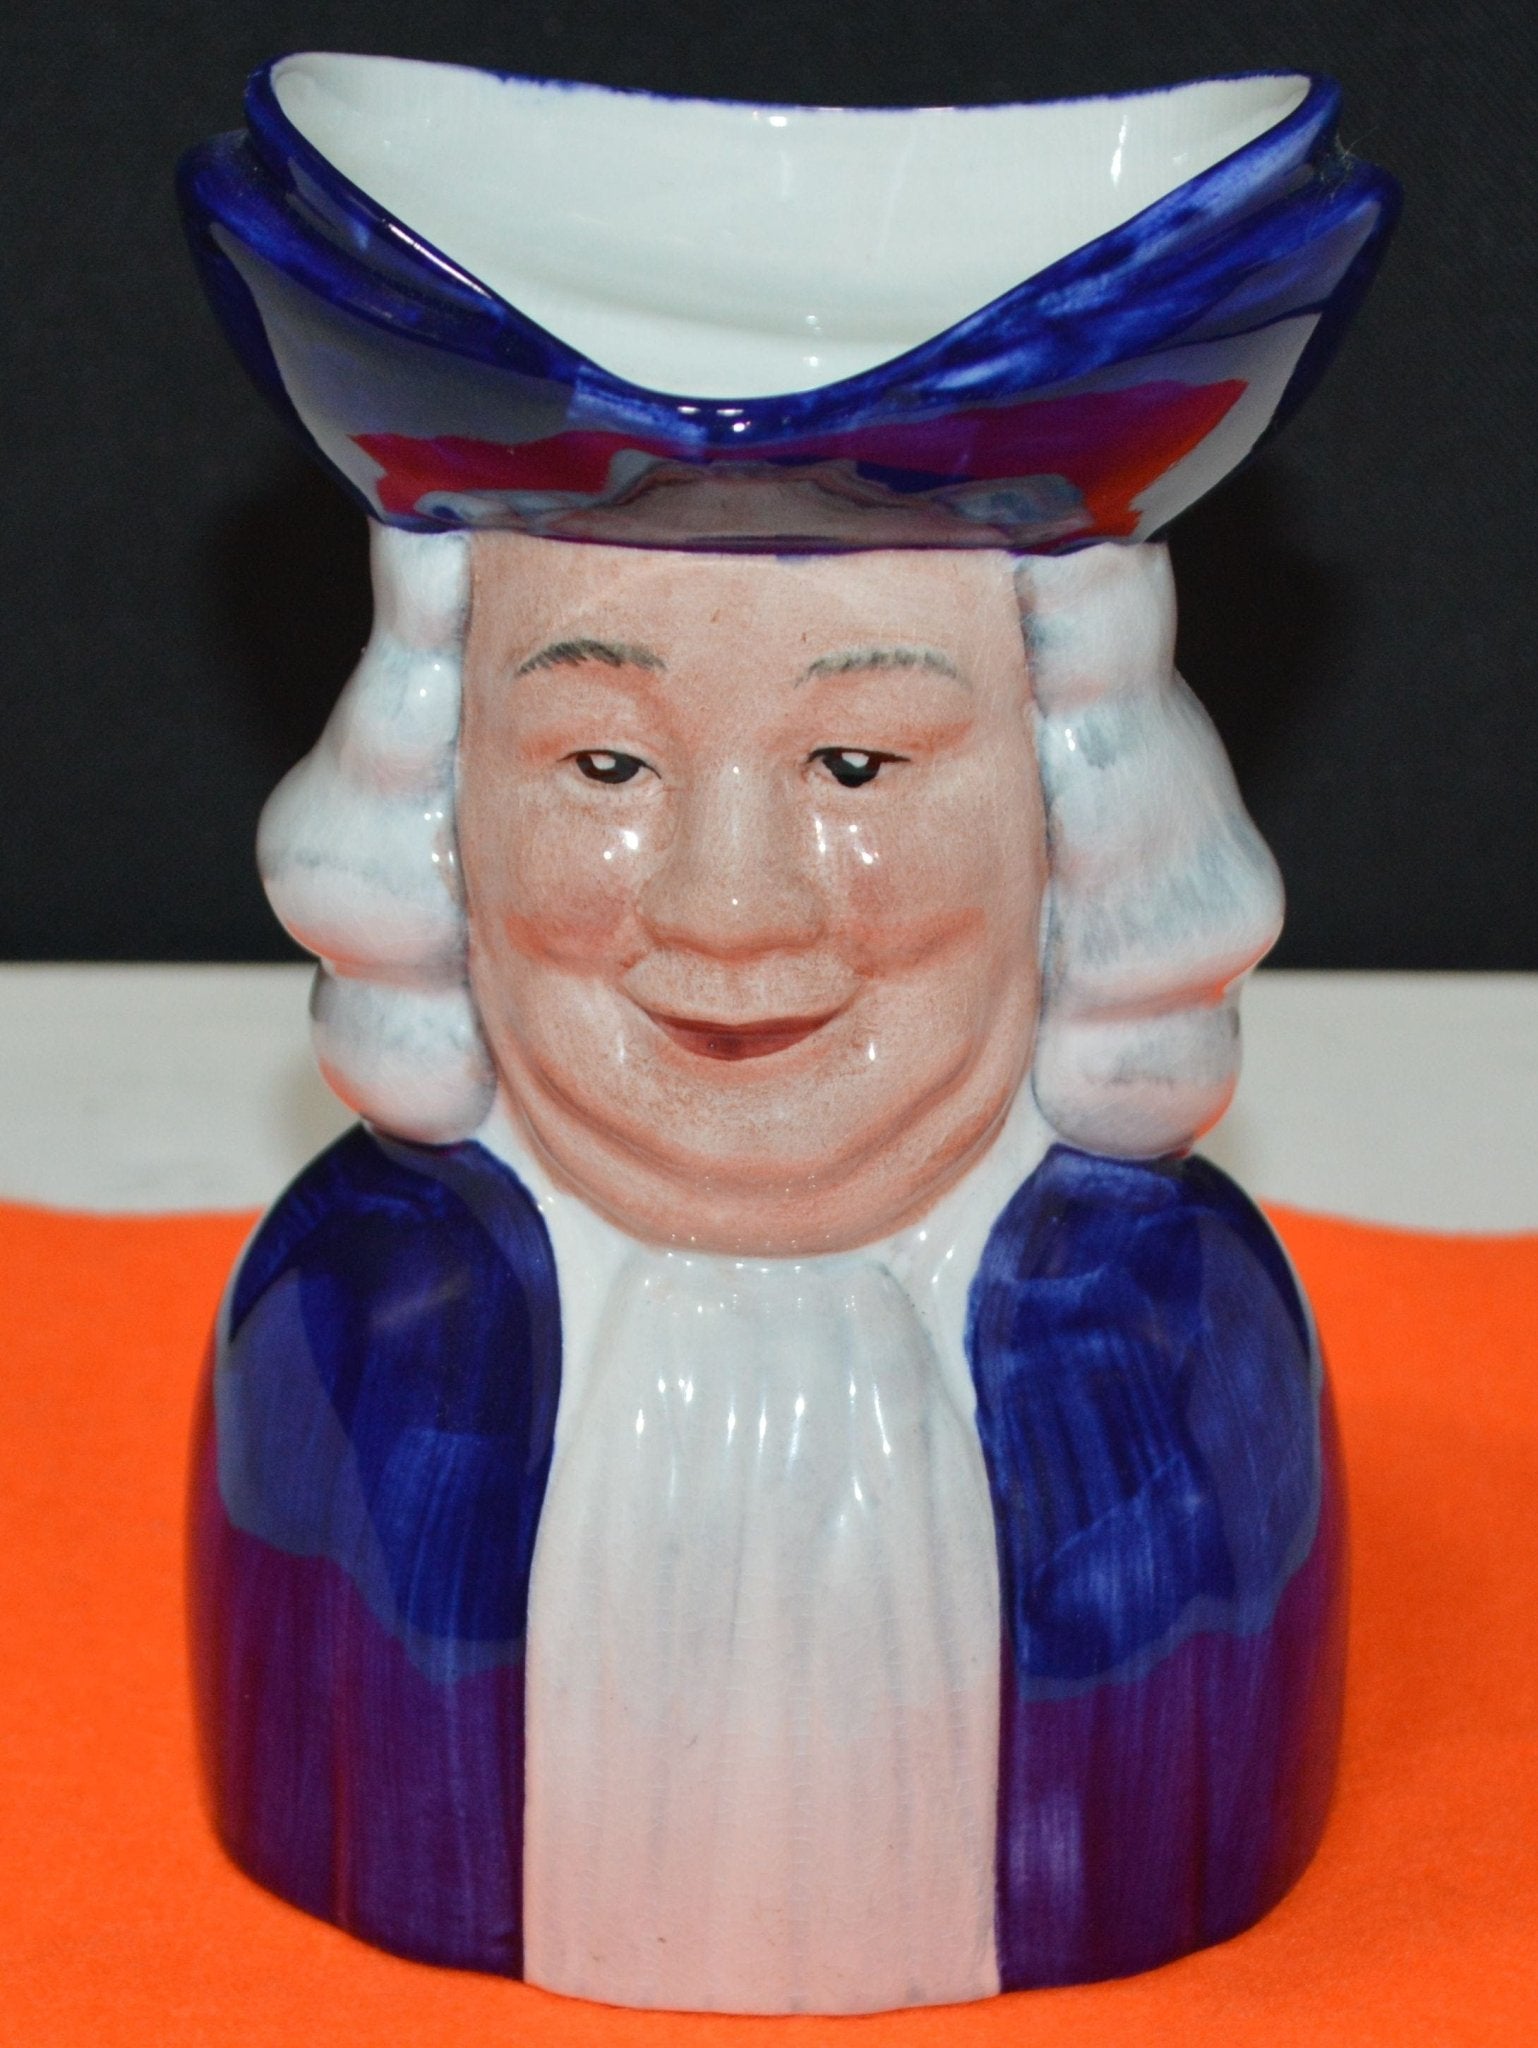 WOOD & SONS HAND PAINTED RALPH ENOCH TOBY JUG(PREVIOUSLY OWNED) GOOD CONDITION - TMD167207